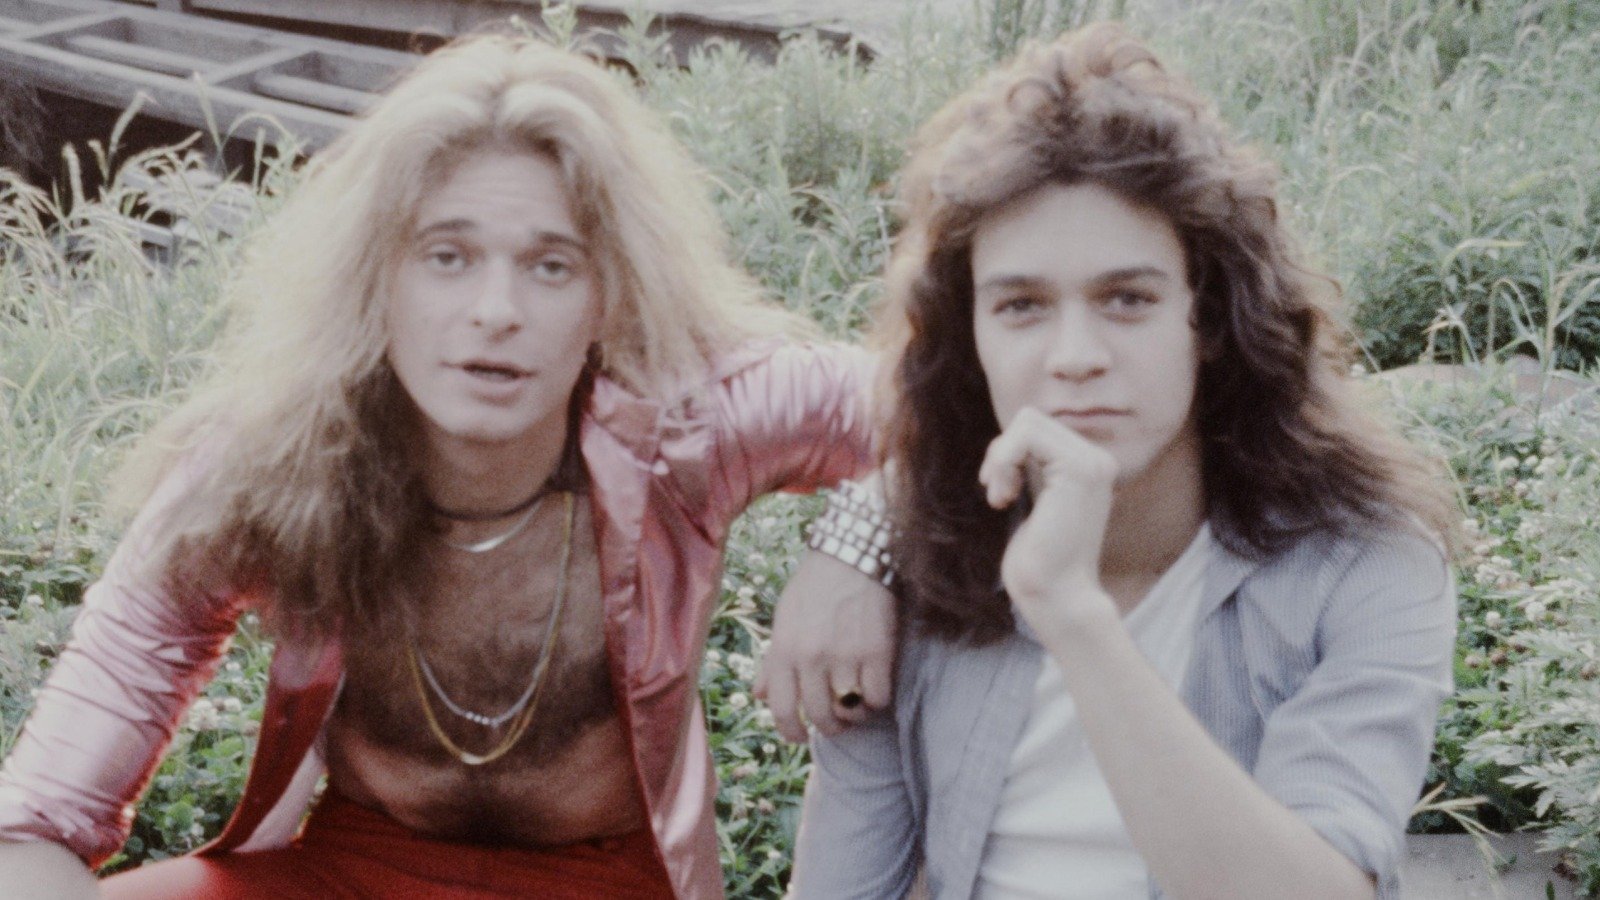 The Truth About David Lee Roth And Eddie Van Halen's Relationship